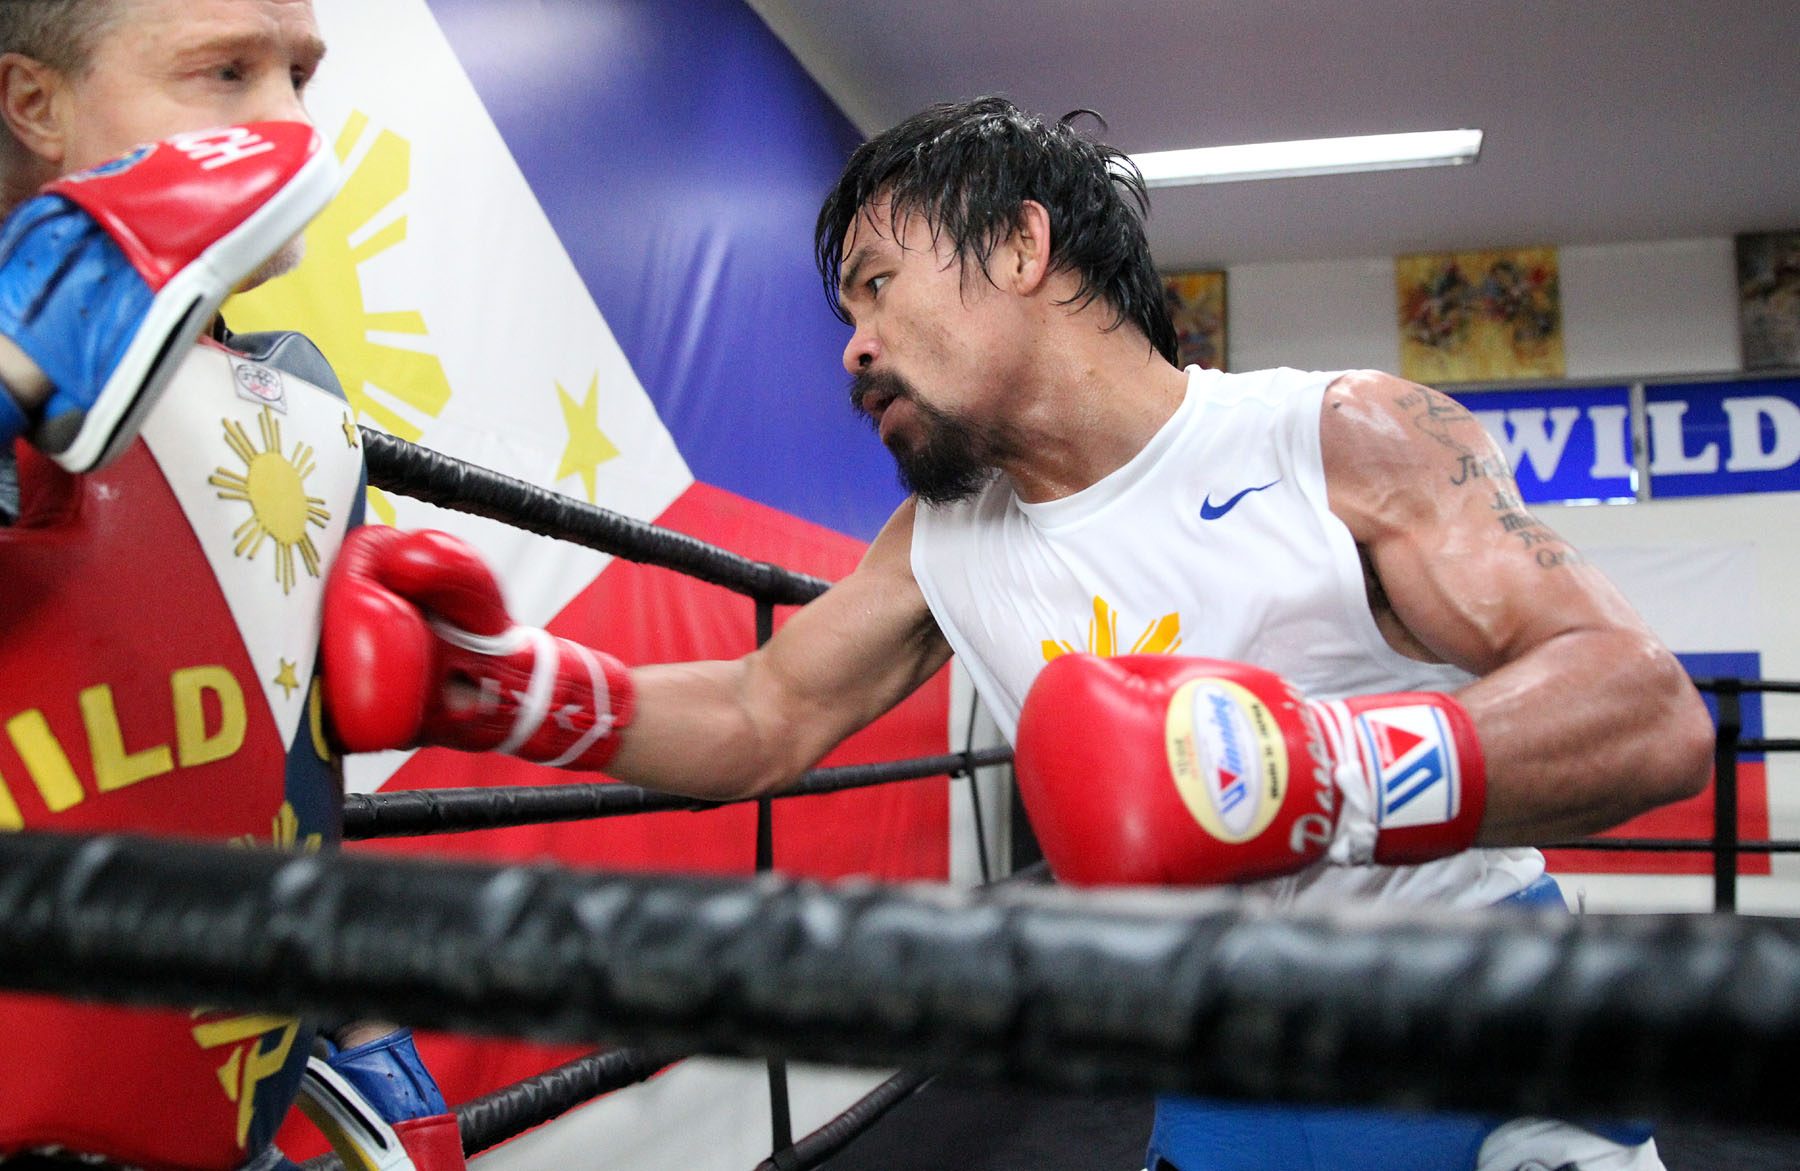 Pacquiao’s speed and footwork will be keys to victory, says Roach